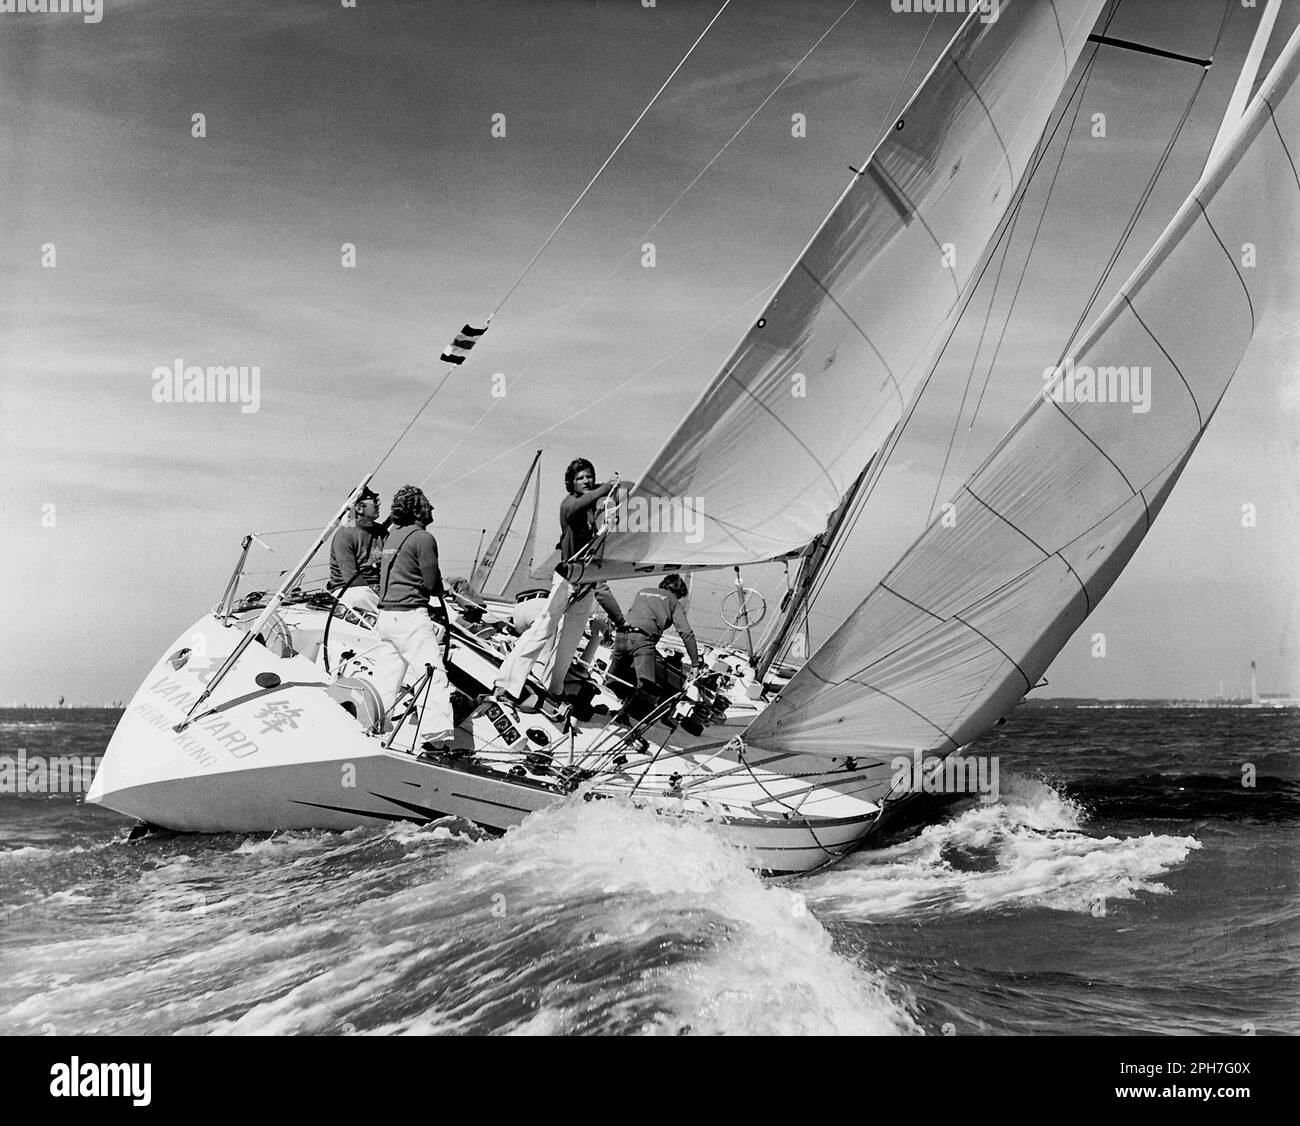 AJAXNETPHOTO. AUGUST, 1977. SOLENT, ENGLAND. - ASIAN ADMIRAL'S CUPPER  -  HONG KONG ENTRY VANGUARD DURING INSHORE RACE. PHOTO:JONATHAN EASTLAND/AJAX REF:MX340 222904 40 (SEE SAME YACHT IN 1979 CLASSIC BROACH AND WIPE OUT - 906091 36 1 - FIVE PICTURES IN SERIES). Stock Photo